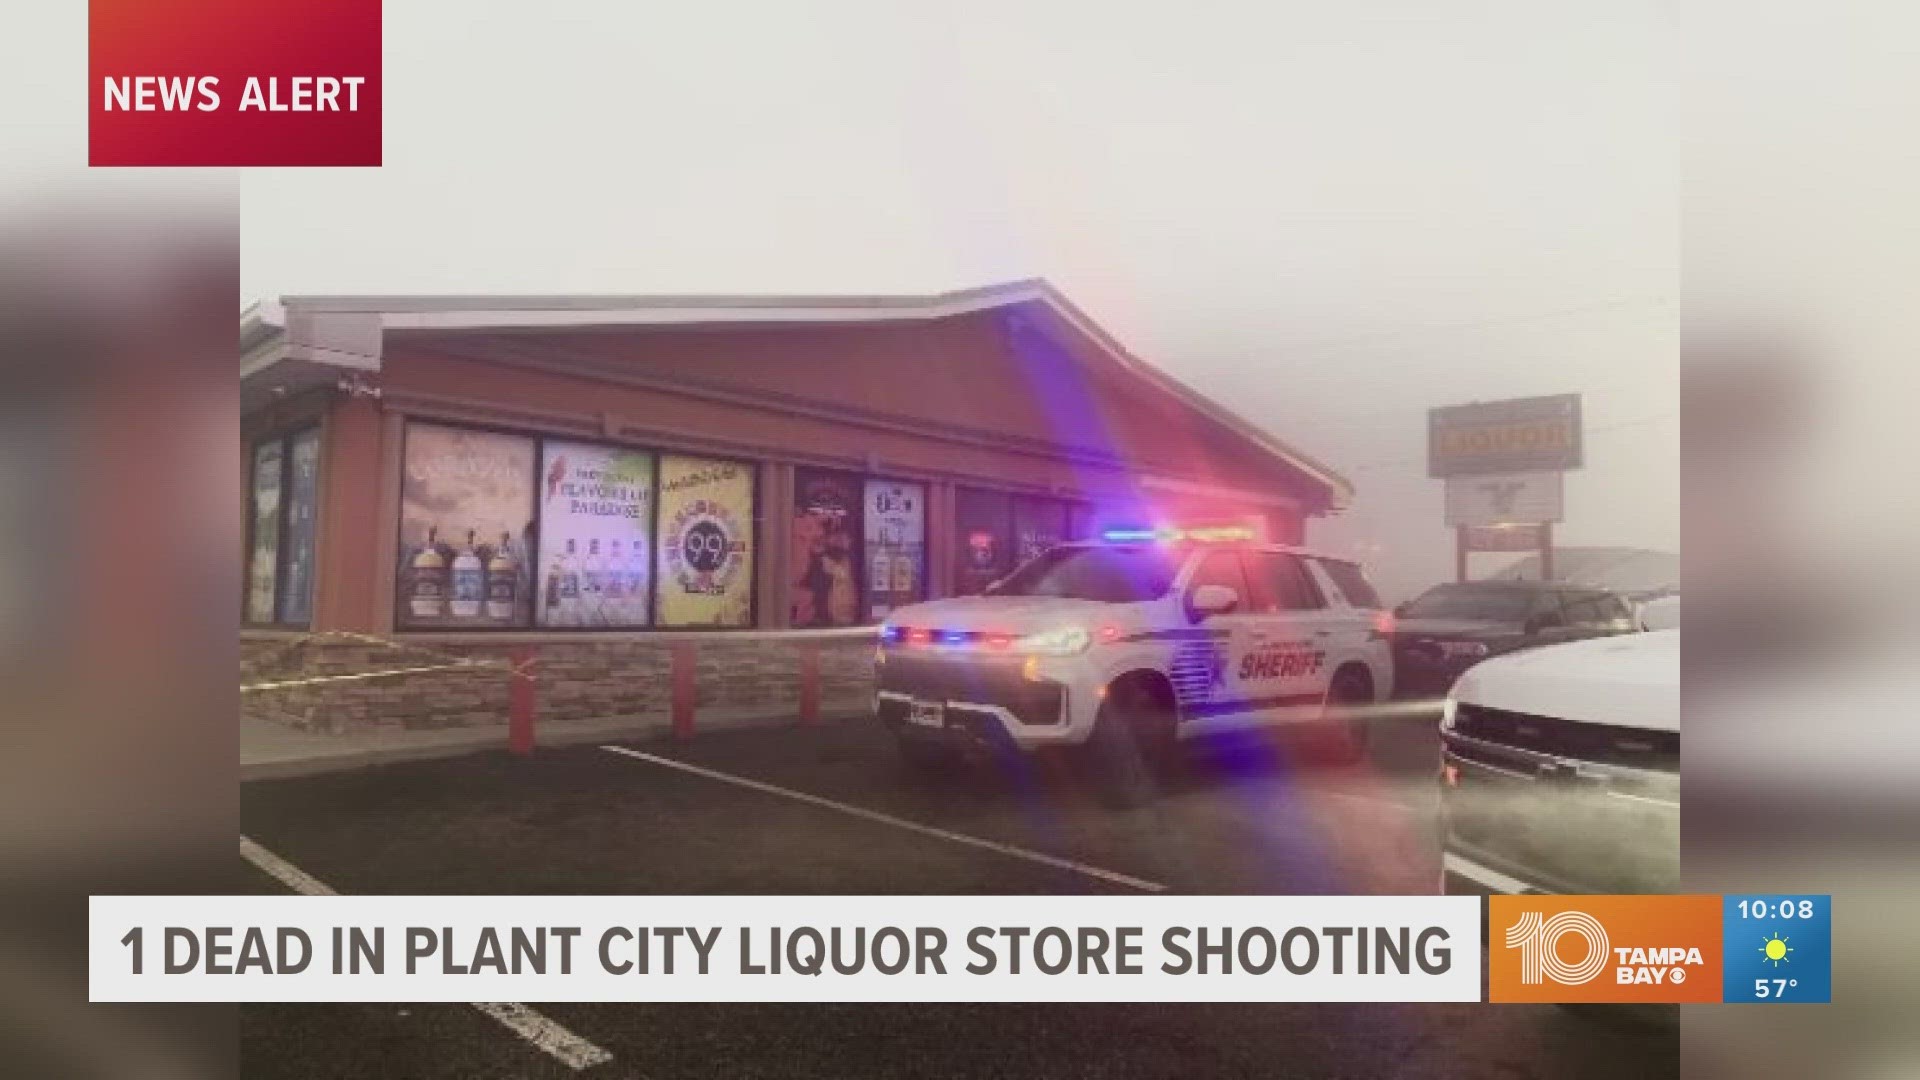 A man died from his injuries following a shooting early Saturday at a Plant City liquor store, authorities said.